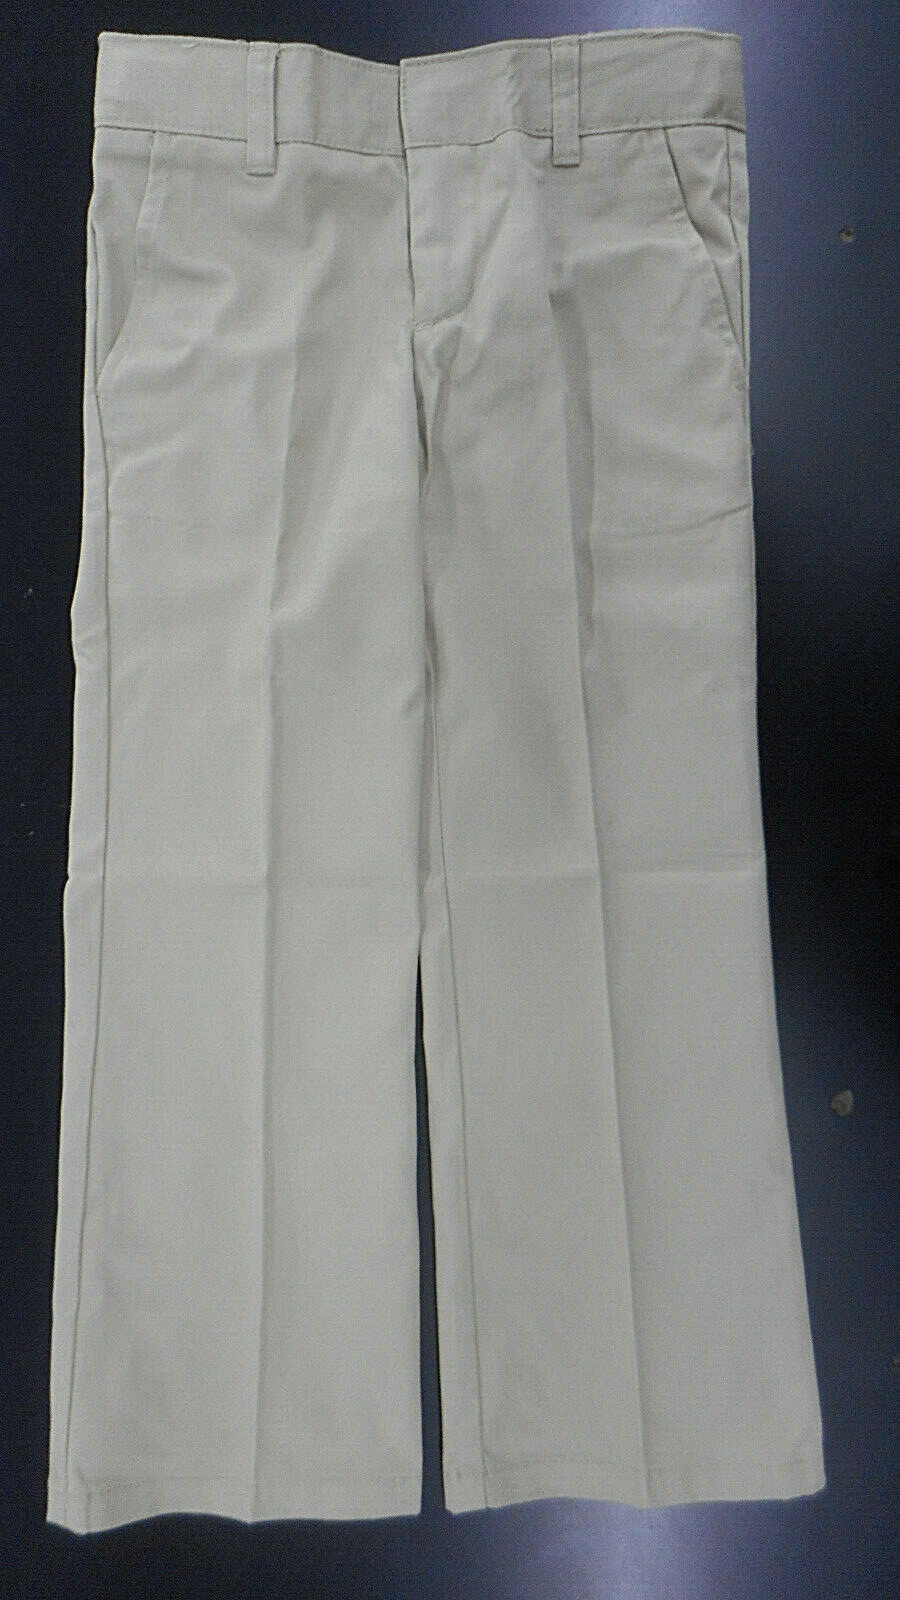 Today's only Girls French Toast $28 Rapid rise Khaki Slim Uniform Pants Size Fit Bootcut